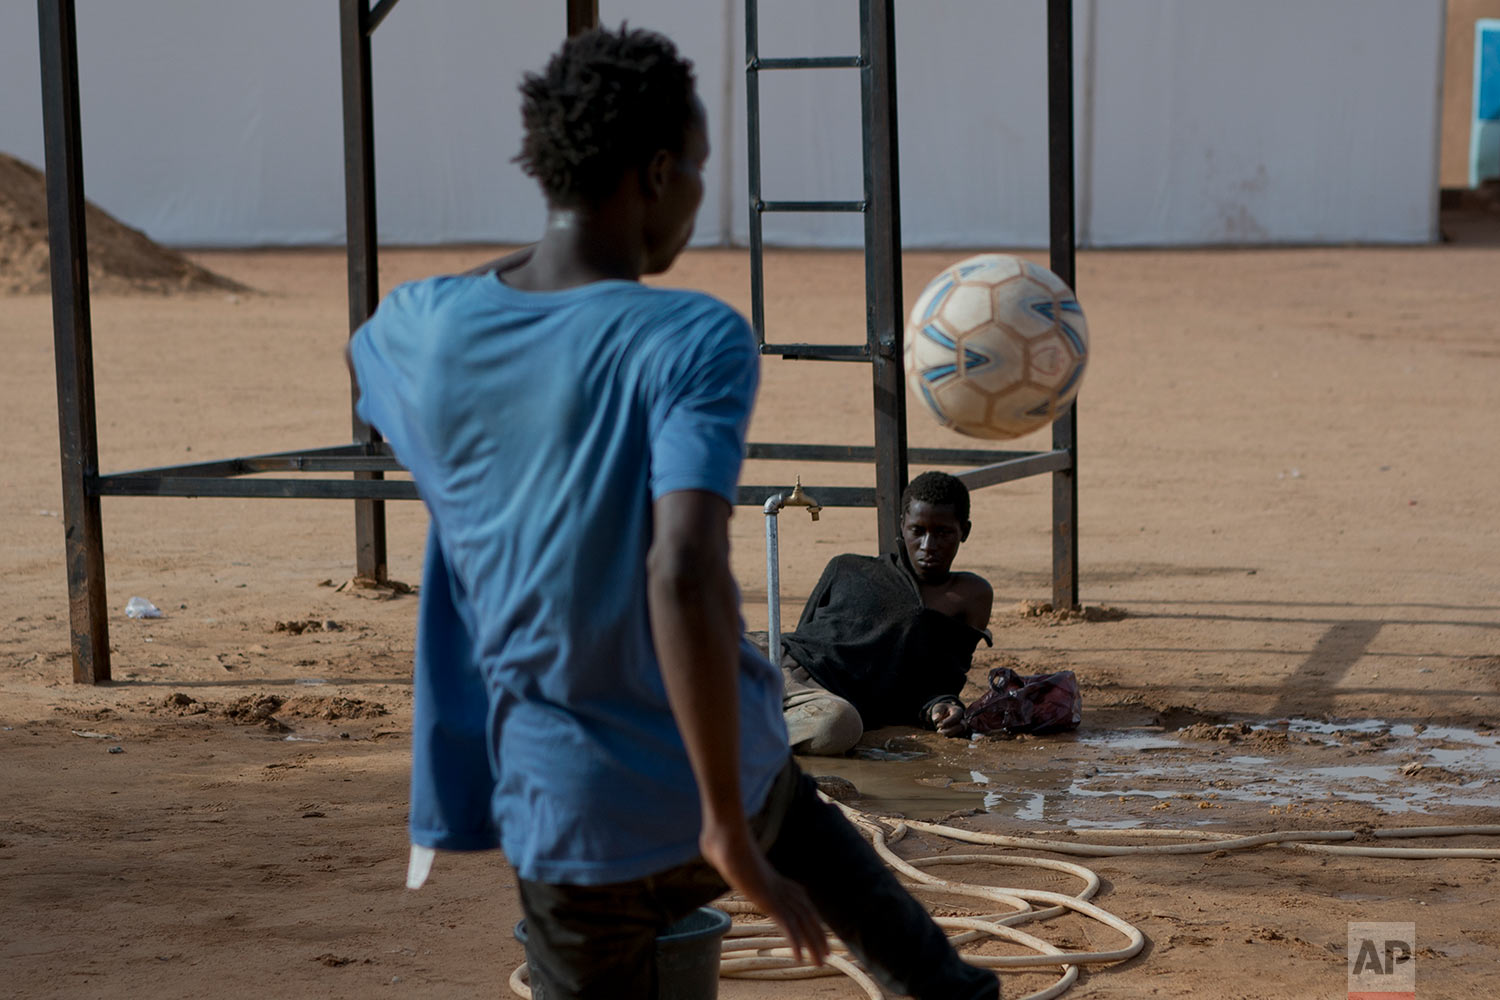  A young migrant who has been expelled from Algeria watches others play football in a transit center in Arlit, Niger, on June 1, 2018 (AP Photo/Jerome Delay) 